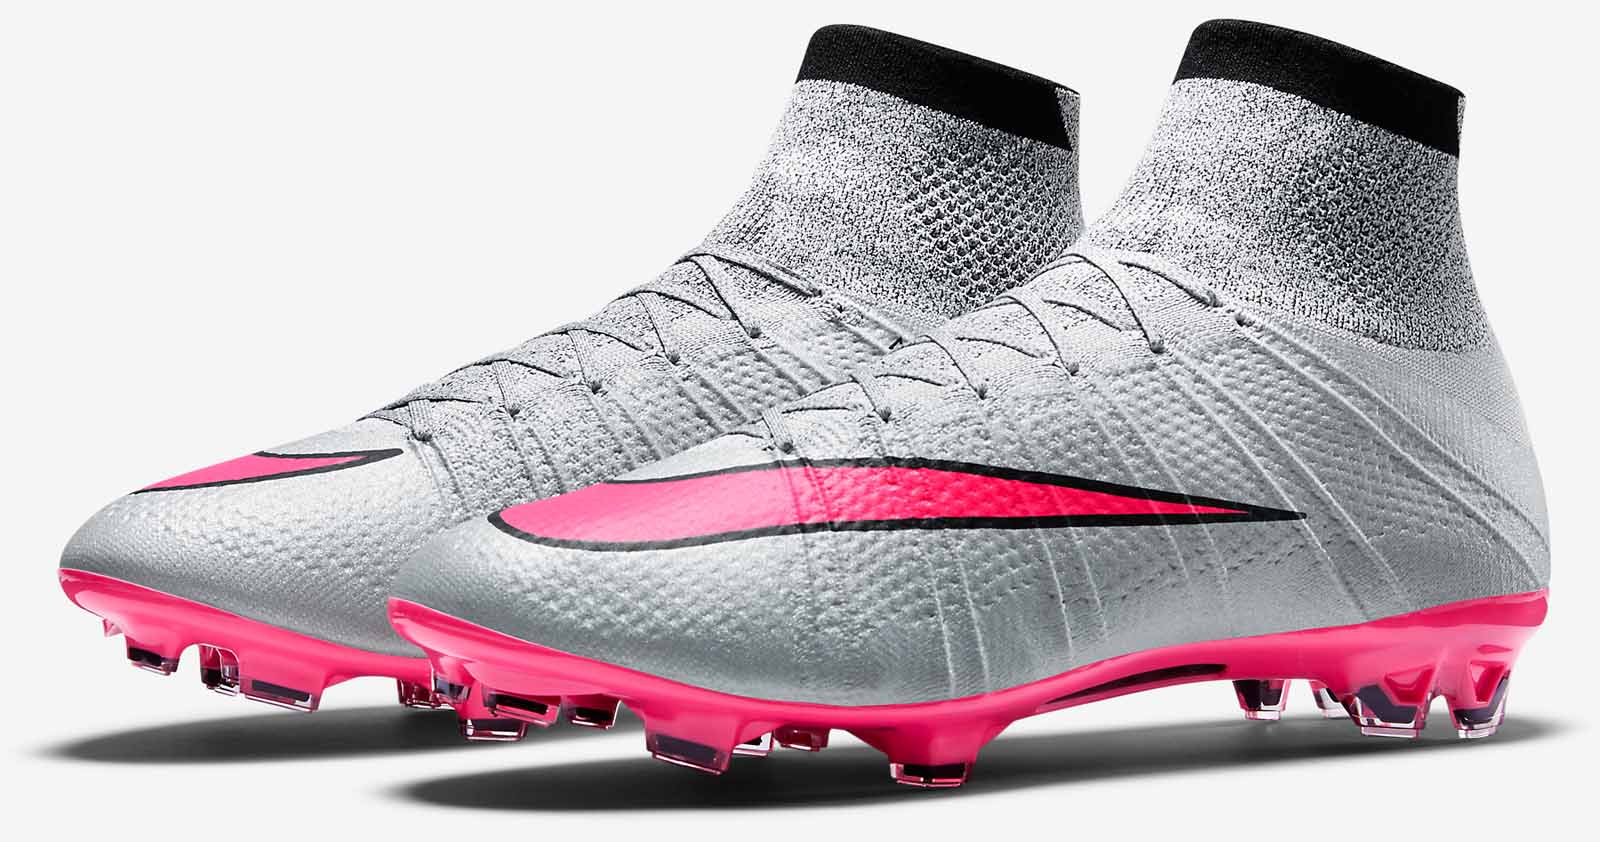 Grey / Pink Superfly 2015 Boots Released -